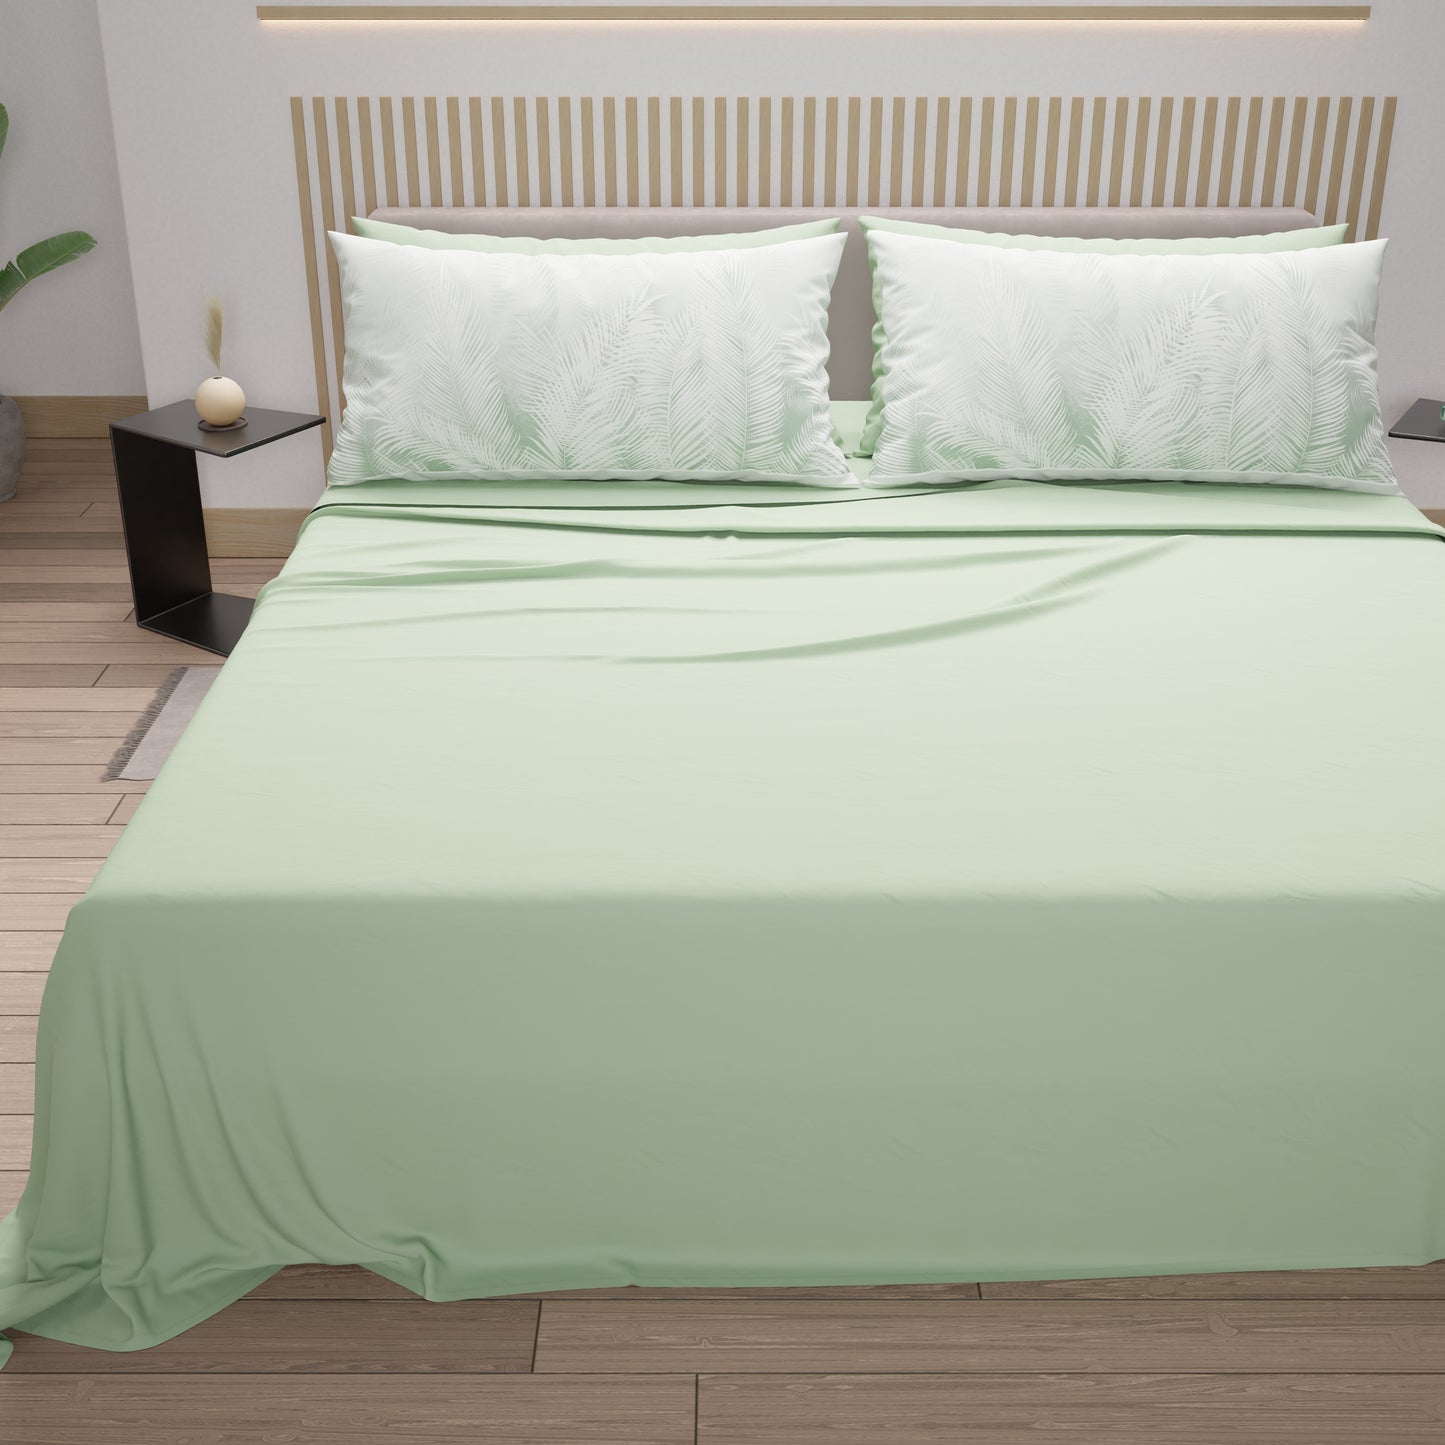 Cotton Sheets, Bed Set with Sage Leaf Digital Print Pillowcases